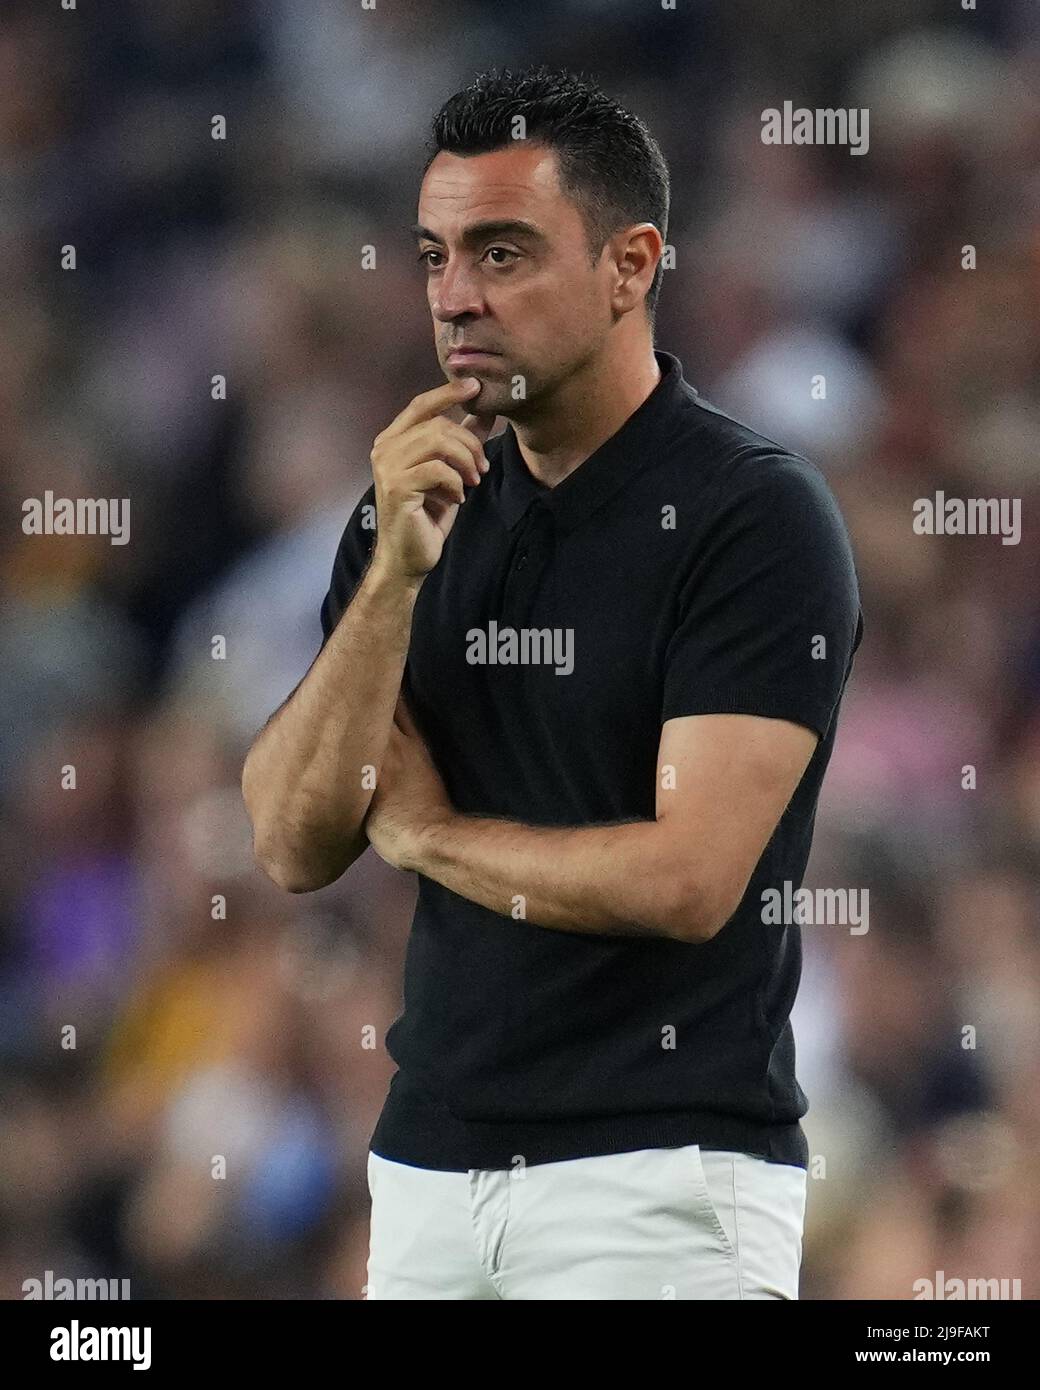 Barcelona, Spain. 22nd May, 2022. FC Barcelona head coach Xavi Hernandez during the La Liga match between FC Barcelona and Villarreal CF played at Camp Nou Stadium on May 22, 2022 in Barcelona, Spain. (Photo by Pressinphoto / Icon Sport) Credit: PRESSINPHOTO SPORTS AGENCY/Alamy Live News Stock Photo